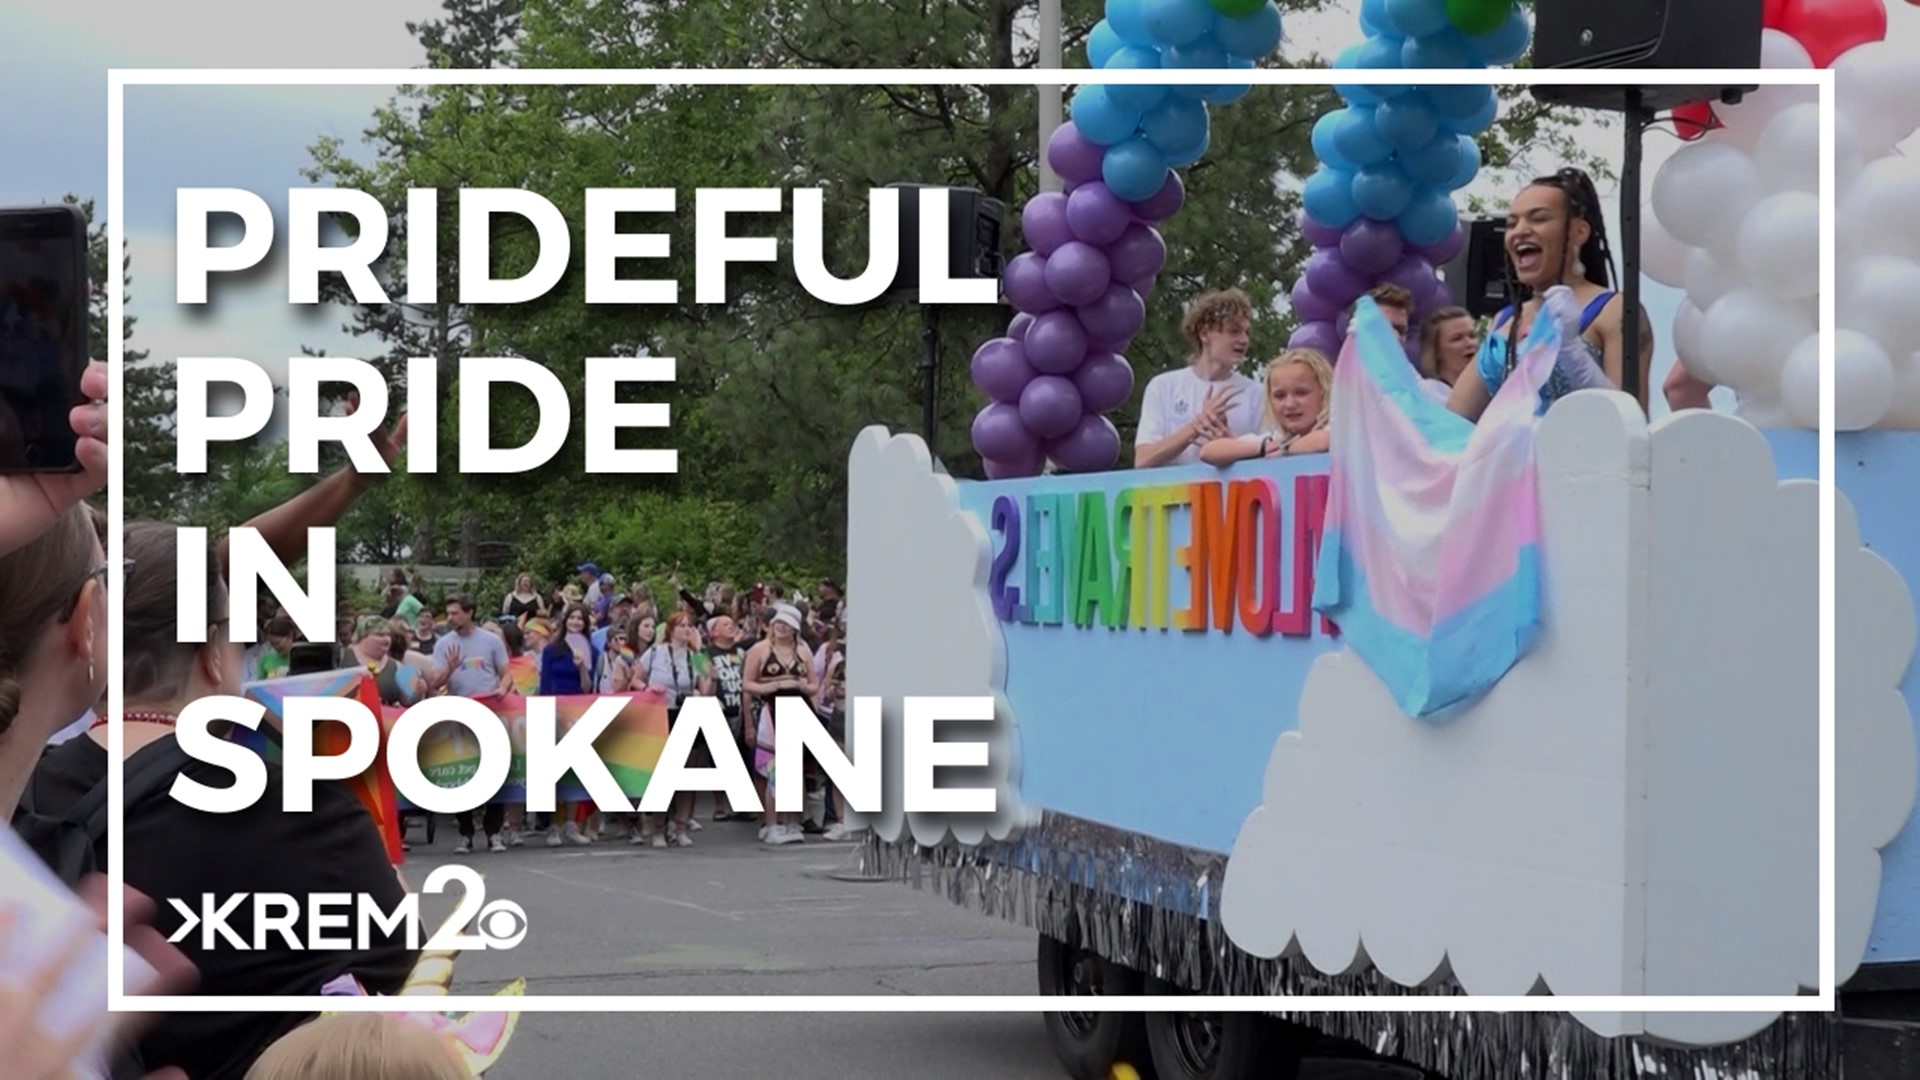 The parade will start at noon at North Stevens Street and West Spokane Falls Boulevard and will end at North Howard Street and West Spokane Falls Boulevard.